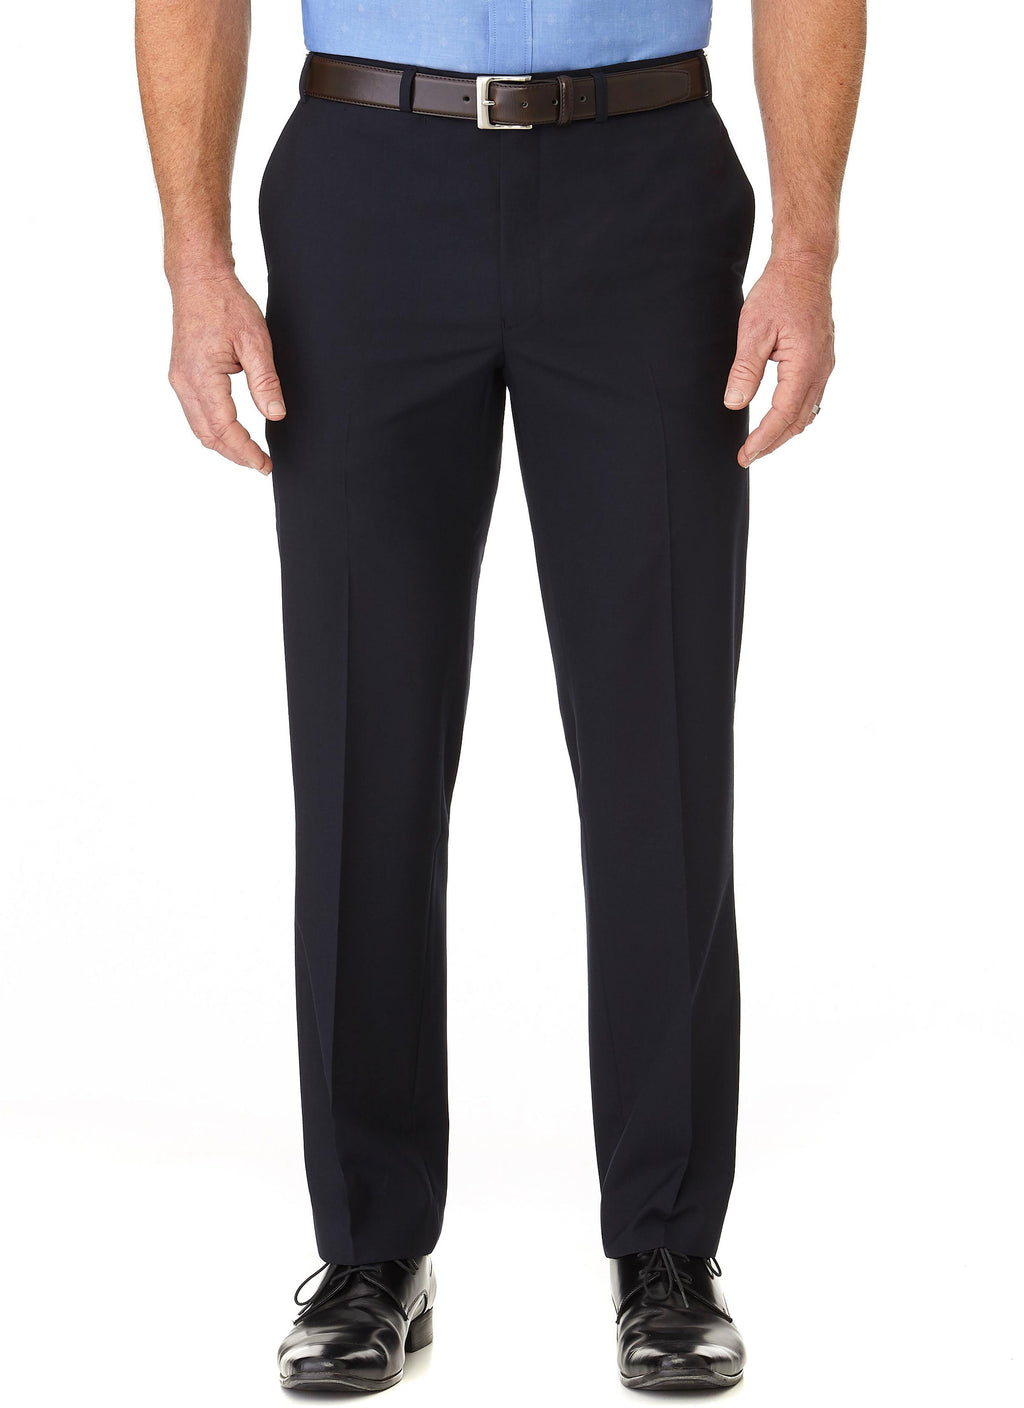 LONSDALE FLAT FRONT TROUSER